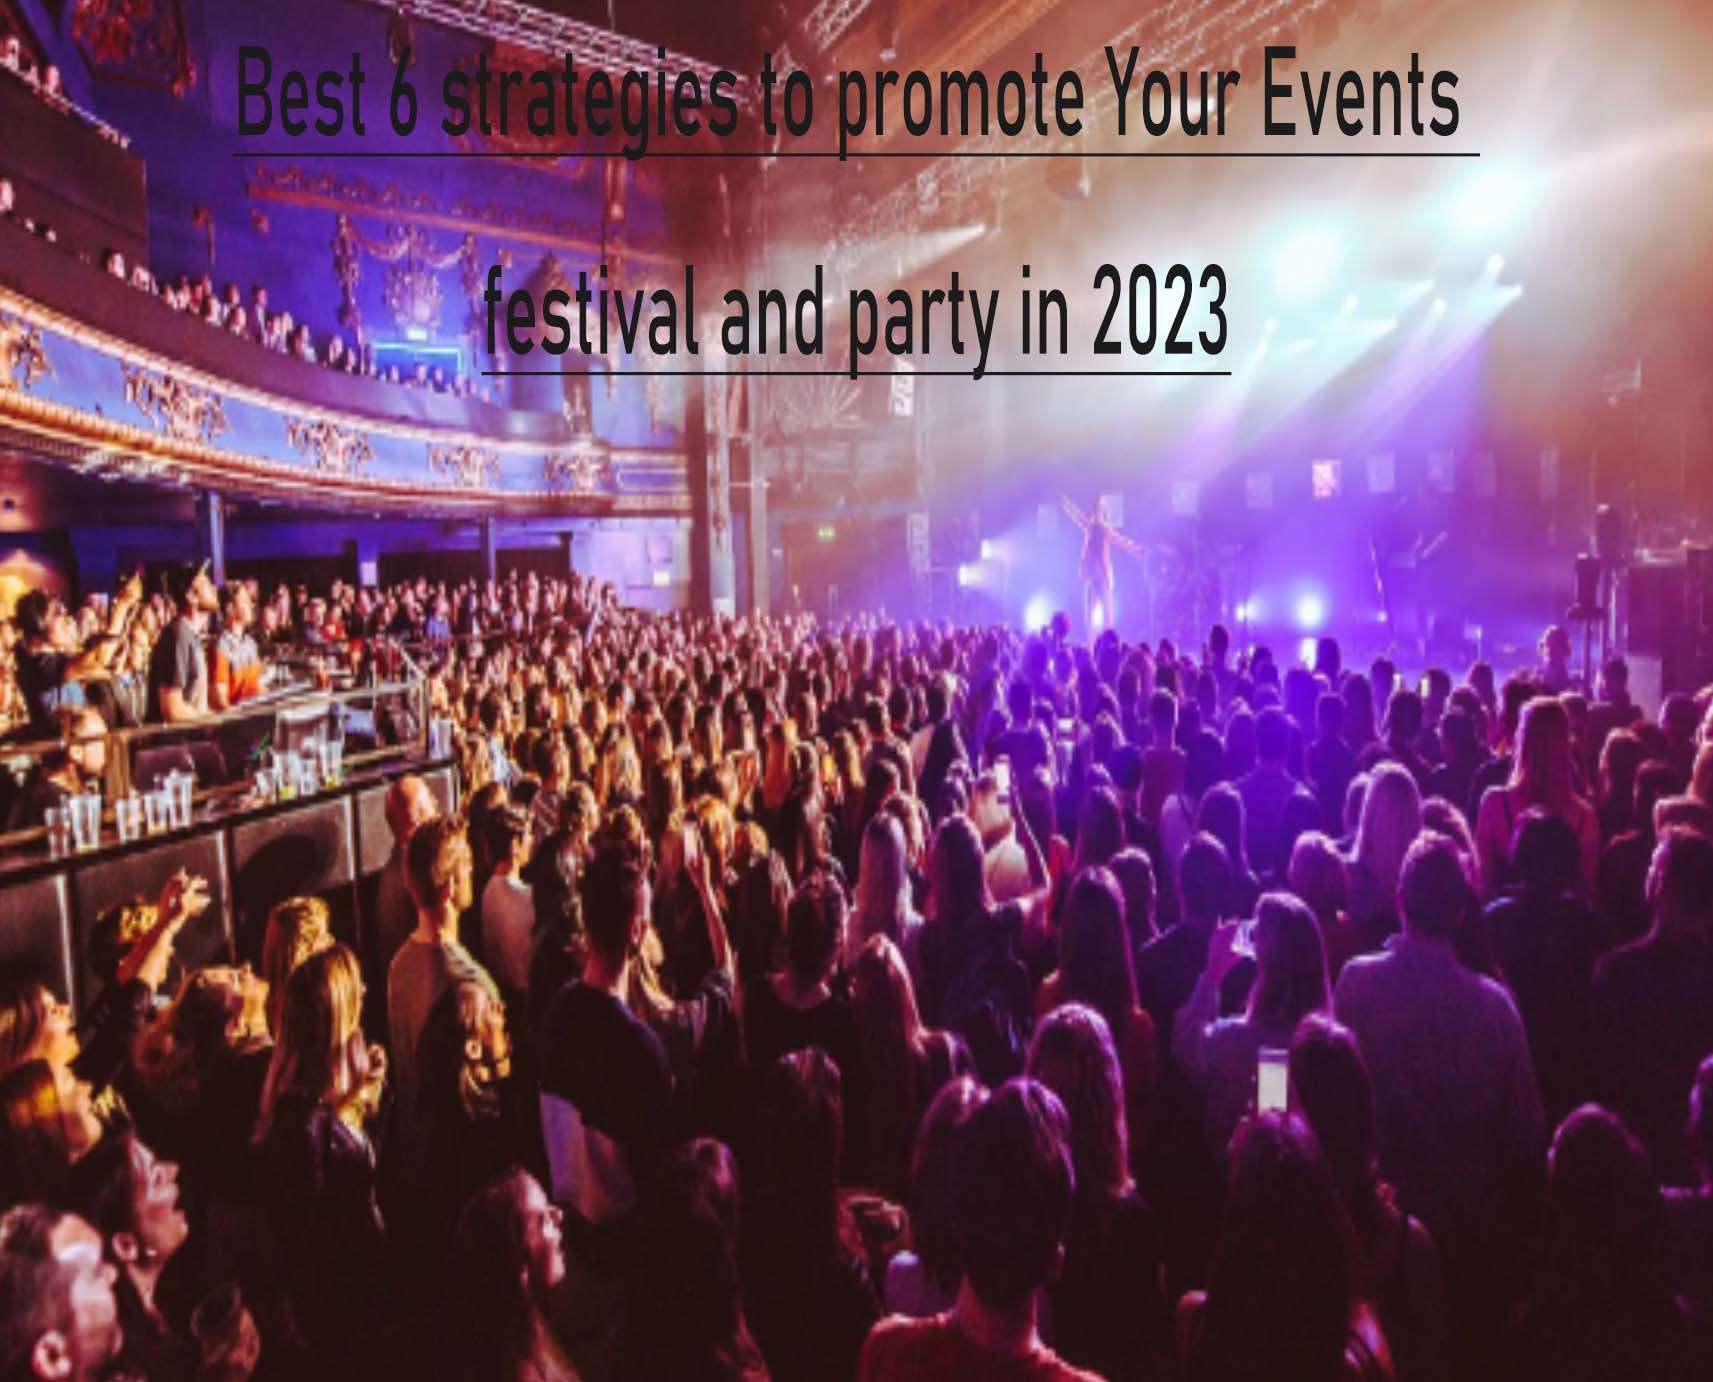 Best 6 strategies to promote Your Events festival and party in 2023